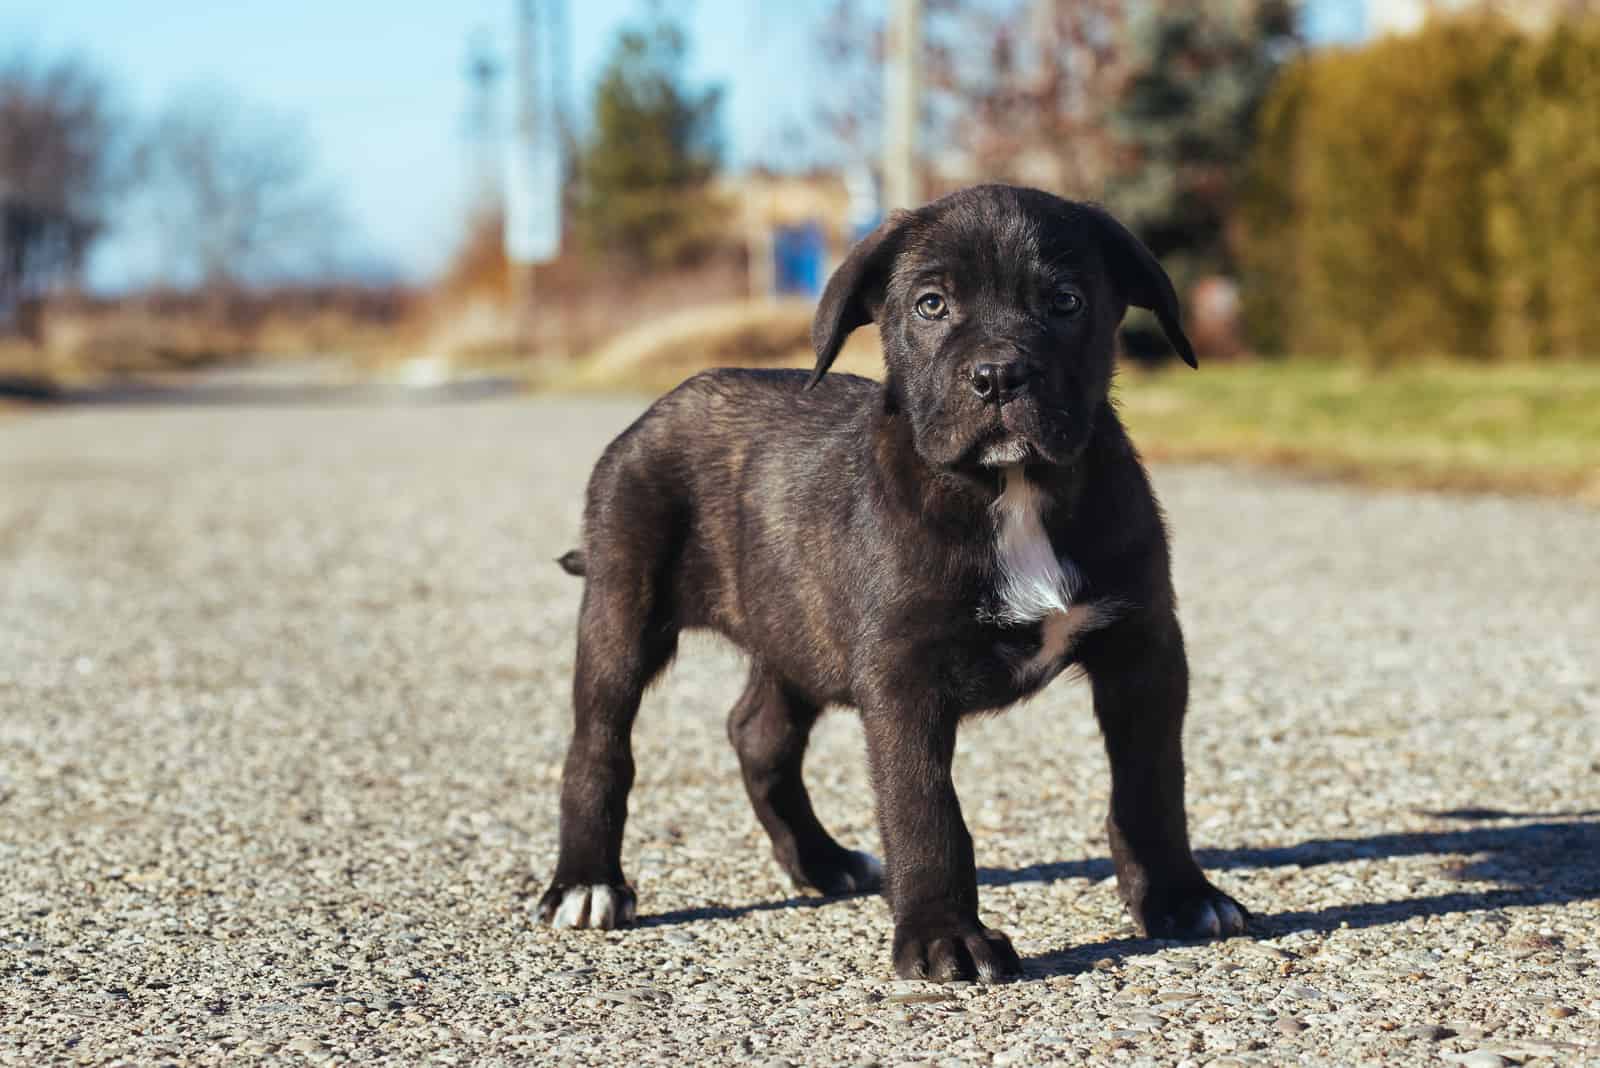 cane corso the puppy stands on the sand